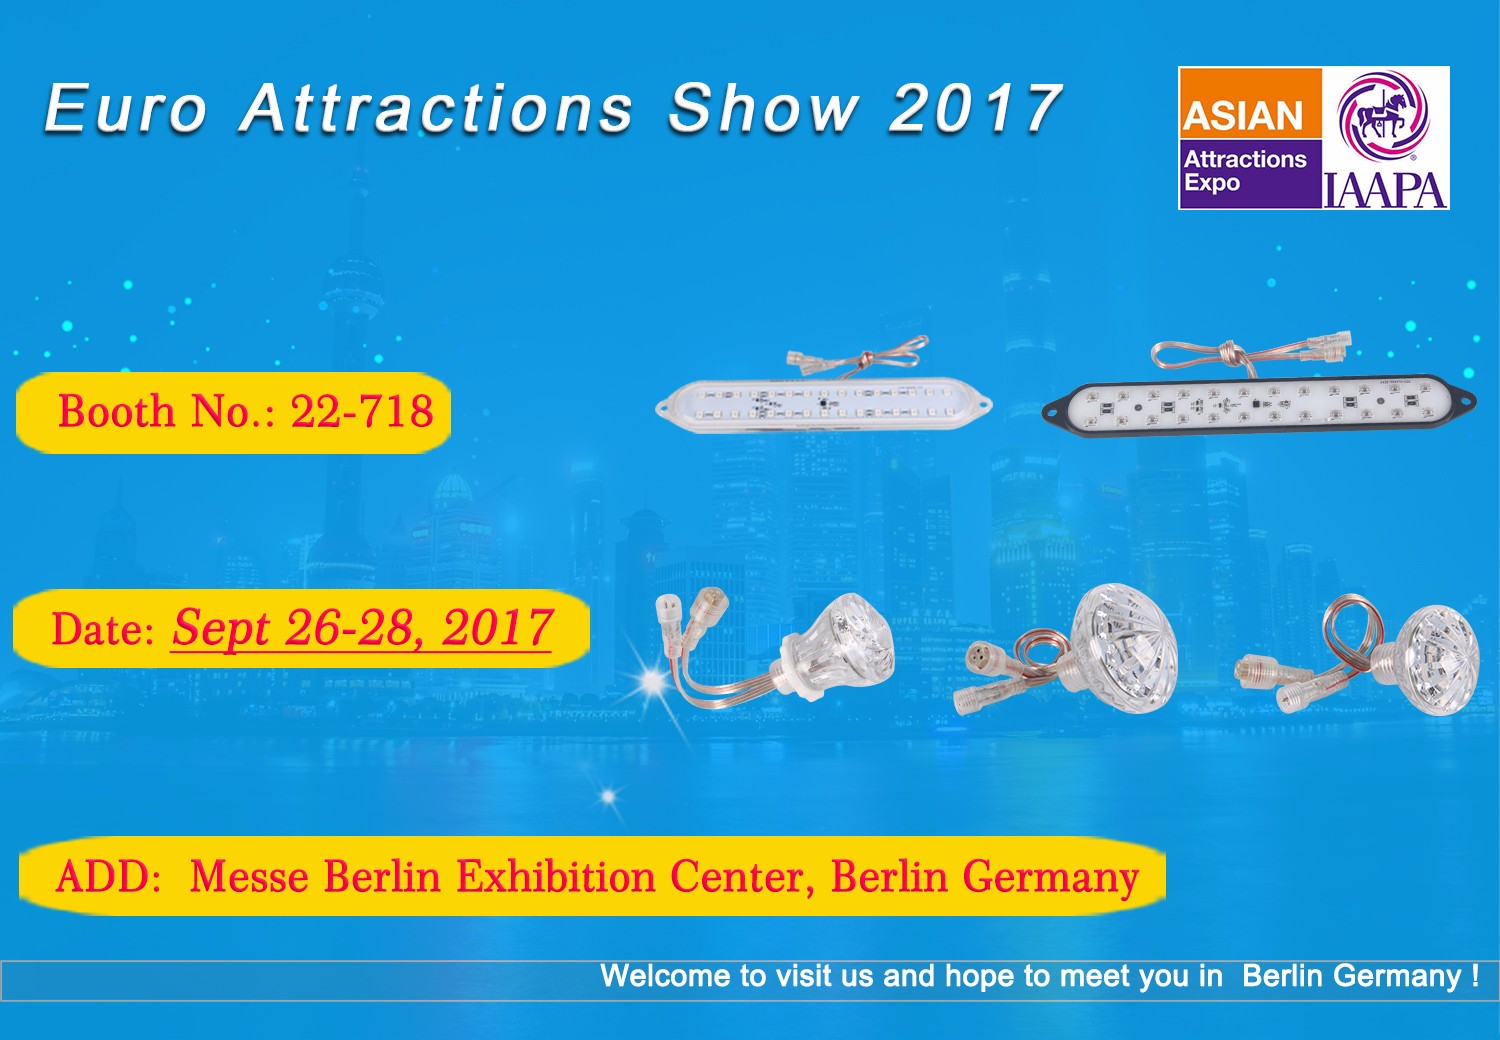 Welcome to visit us in Germany Euro Attractions Show 2017